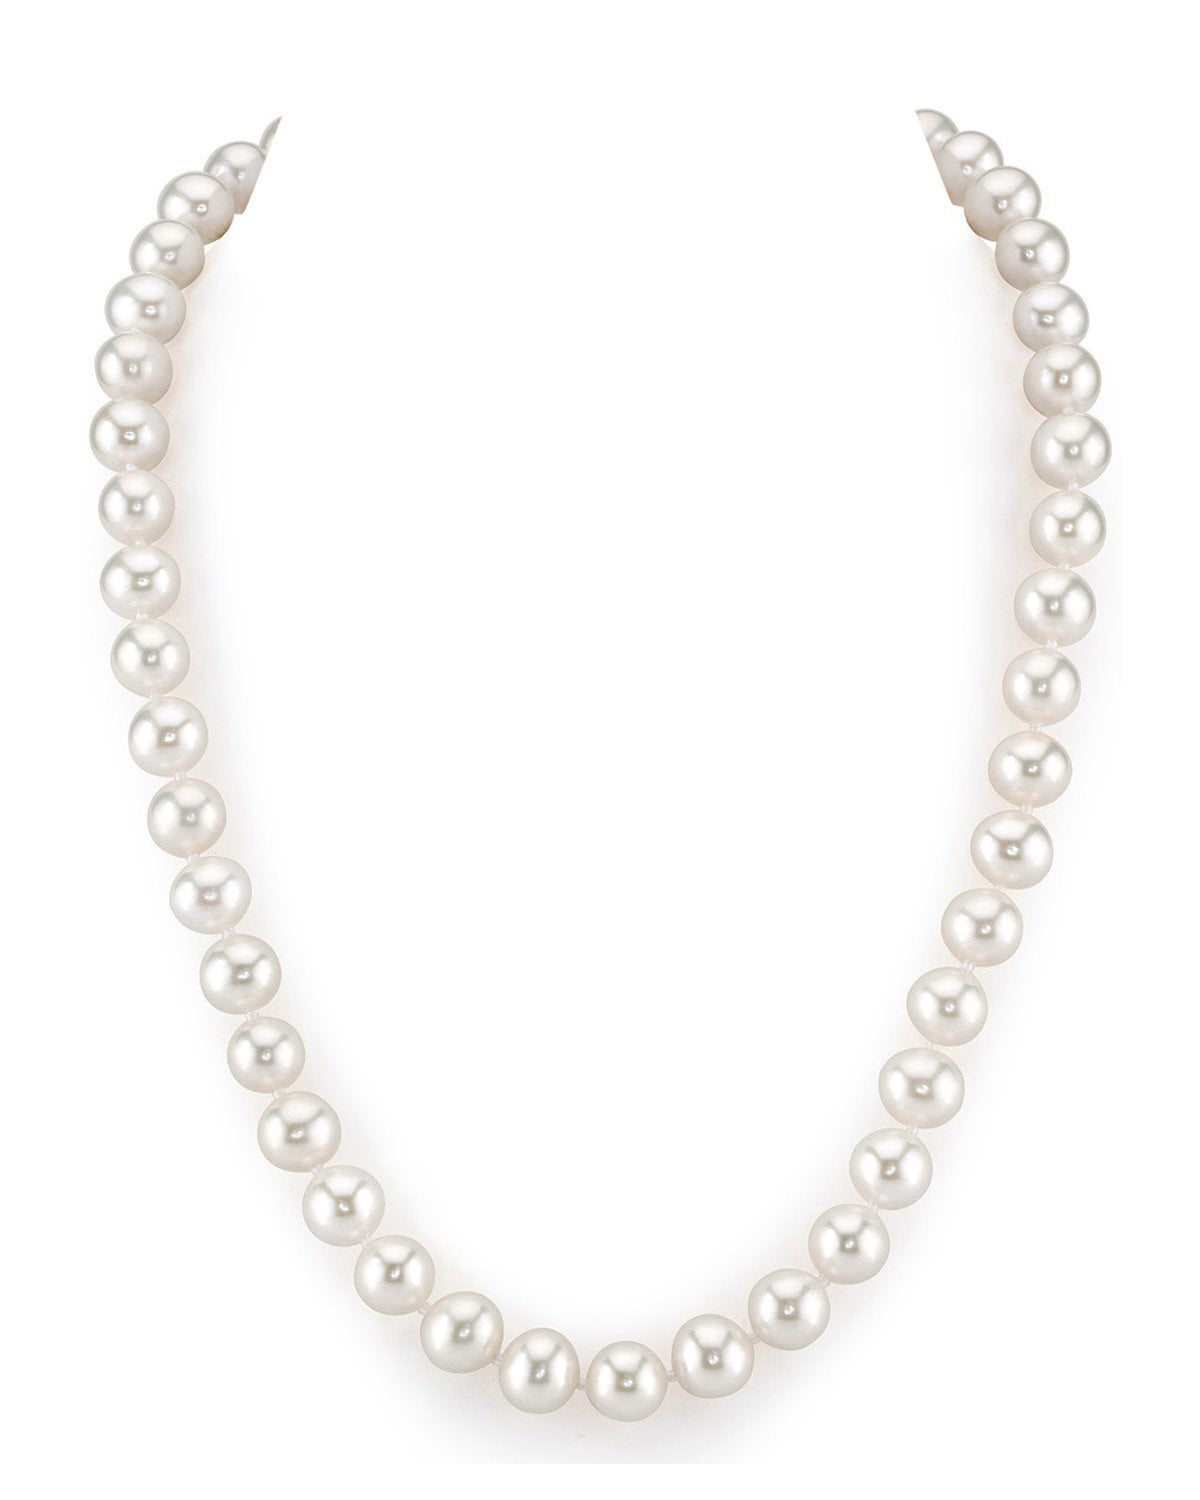 9-10mm White Freshwater Choker Length Pearl Necklace - AAAA